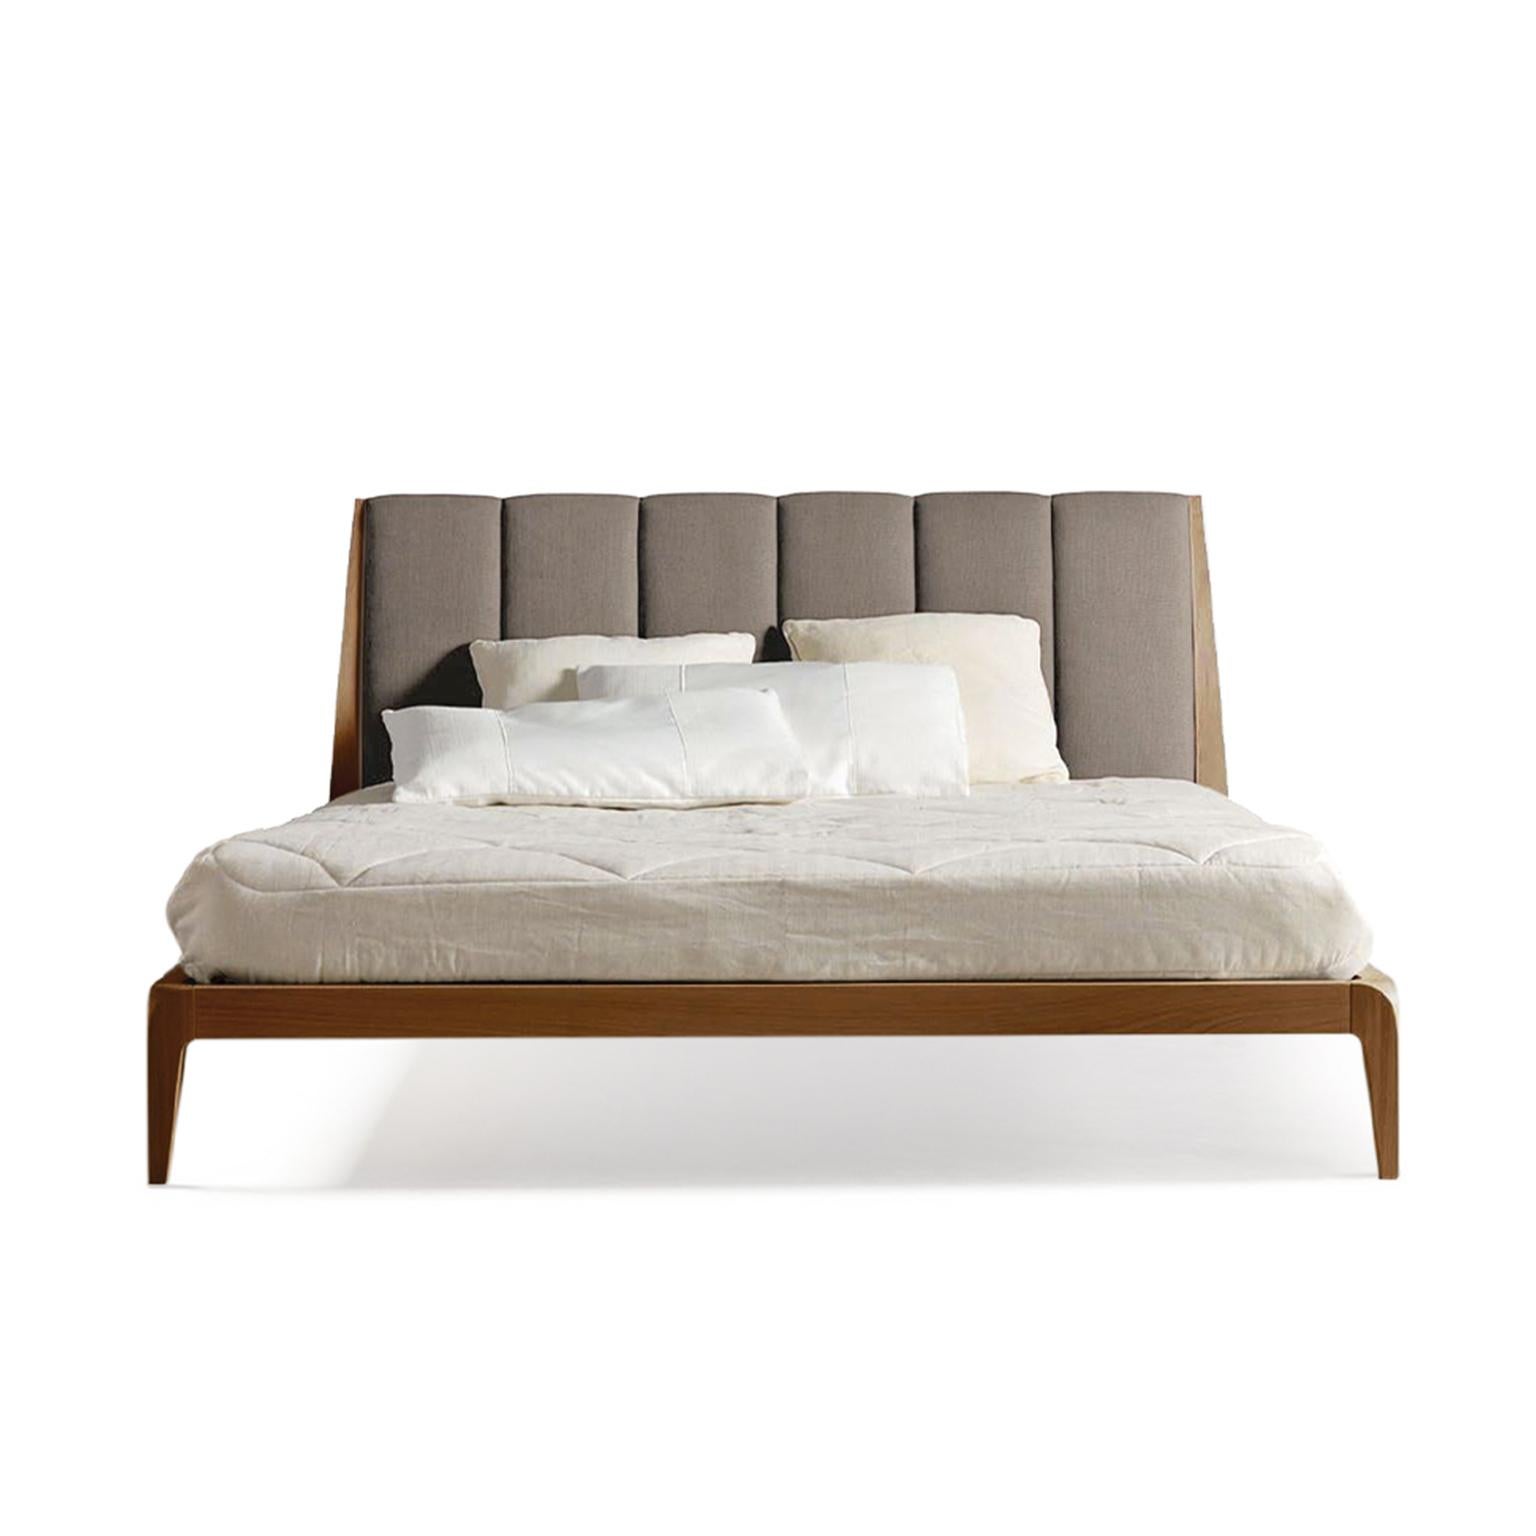 Verso Nord Solid Wood Bed, Walnut in Hand-Made Natural Finish, Contemporary In New Condition For Sale In Cadeglioppi de Oppeano, VR